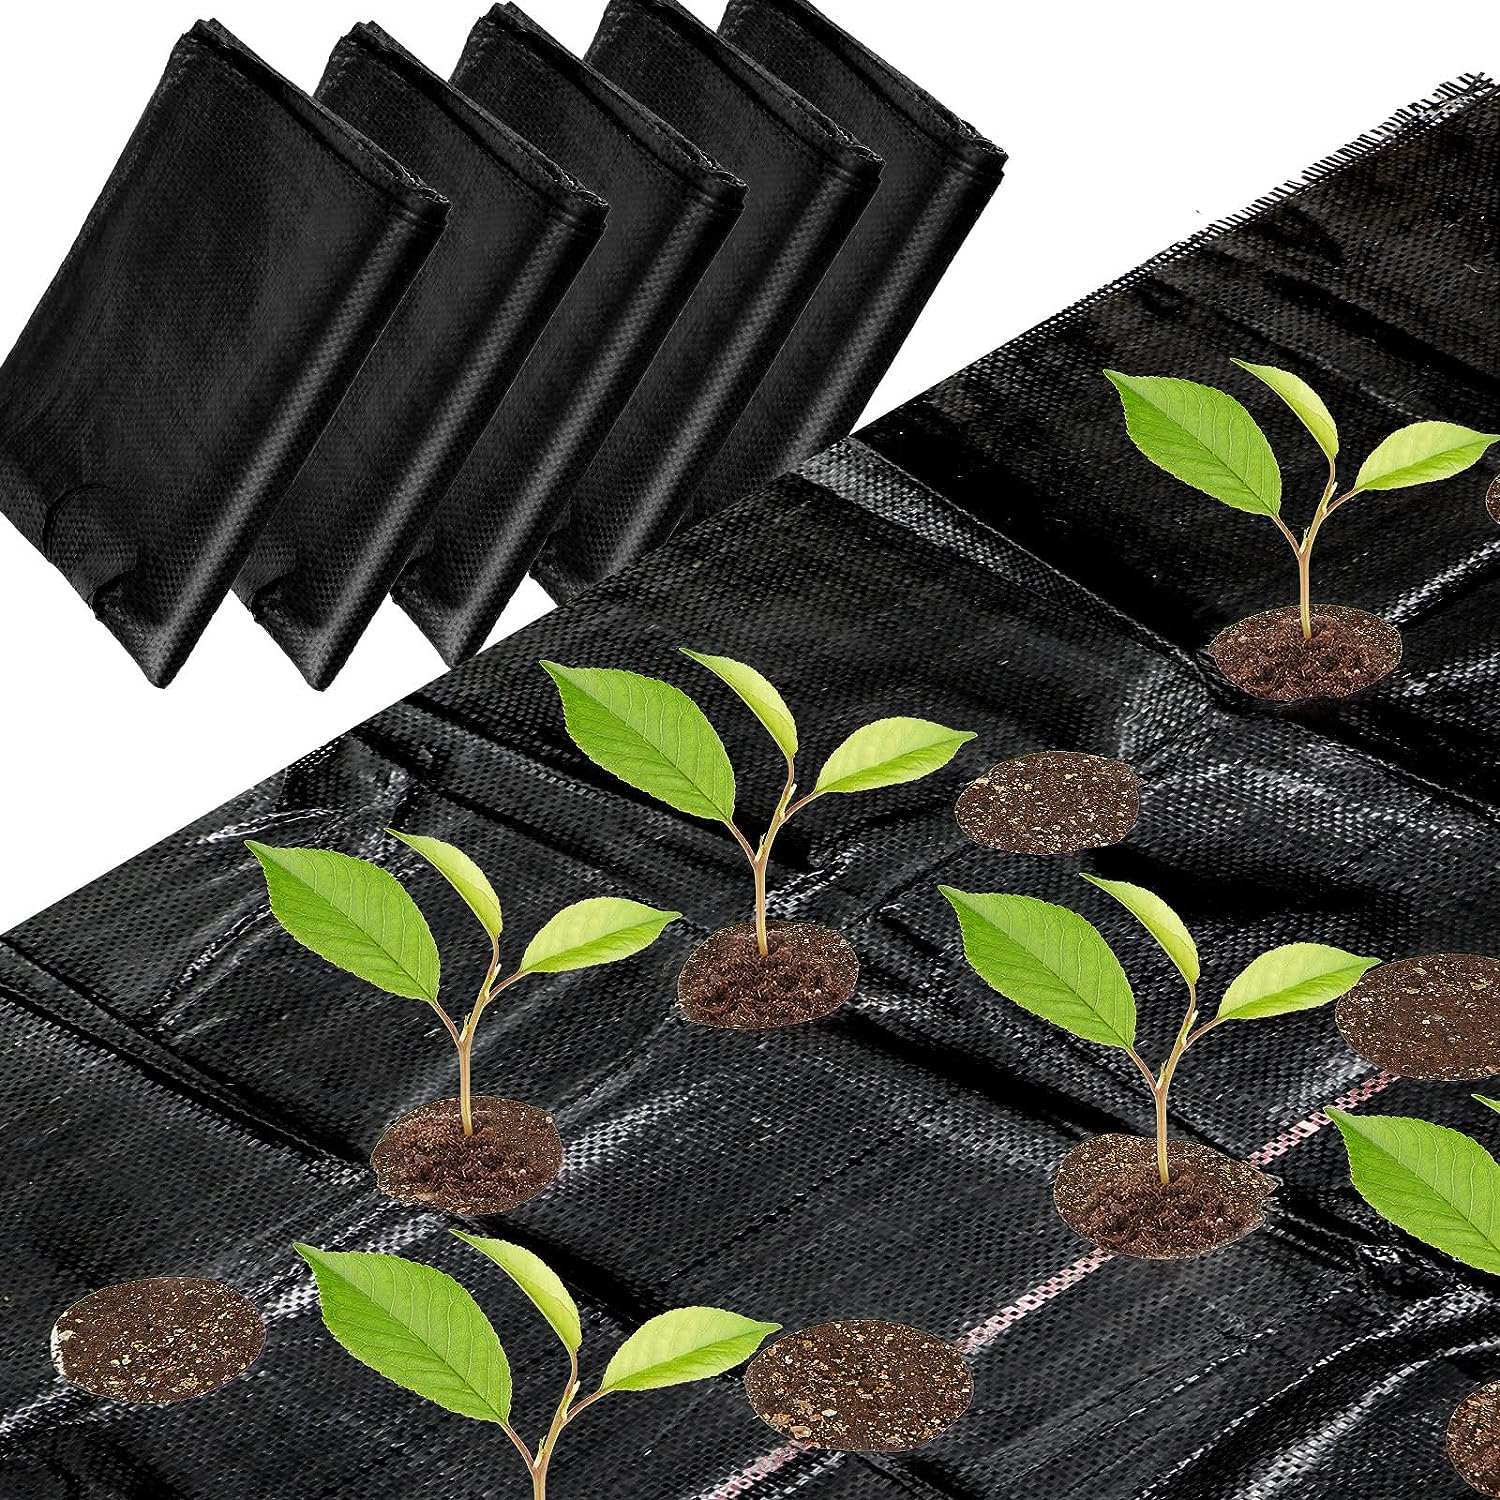 5 Pack Weed Barrier Landscape Fabric with 3'' Planting Holes 3.3 ft x   Reliable Material: The heavy-duty landscape fabric is made of polyethylene material, sturdy and safe, reliable and reusable, UV protection and corrosion resistant,outdoorTOPDEALTOPDEAL8 ft Garden Weed Barrier Fabric Heavy Duty Weed Barrier Landscape Fabric